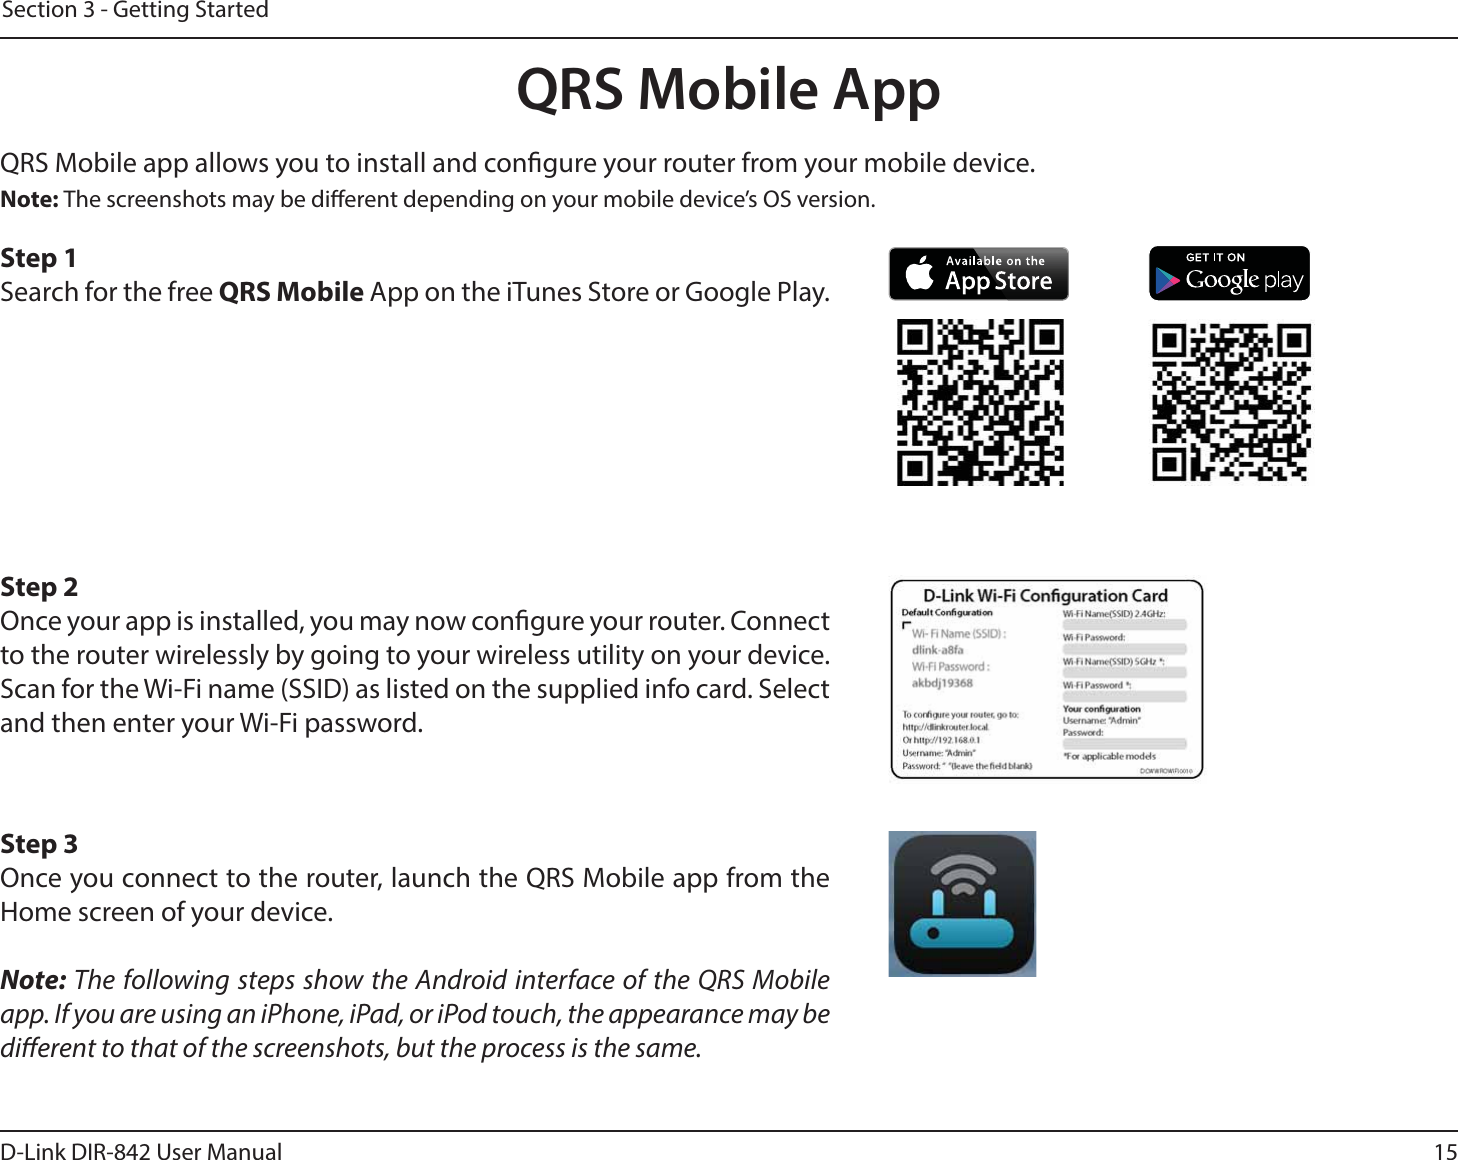 15D-Link DIR-842 User ManualSection 3 - Getting StartedQRS Mobile AppQRS Mobile app allows you to install and congure your router from your mobile device. Step 1Search for the free QRS Mobile App on the iTunes Store or Google Play.4UFQOnce your app is installed, you may now congure your router. Connect to the router wirelessly by going to your wireless utility on your device. 4DBOGPSUIF8J&apos;JOBNF44*%BTMJTUFEPOUIFTVQQMJFEJOGPDBSE4FMFDUand then enter your Wi-Fi password.Step 3Once you connect to the router, launch the QRS Mobile app from the Home screen of your device.Note: The following steps show the Android interface of the QRS Mobile app. If you are using an iPhone, iPad, or iPod touch, the appearance may be dierent to that of the screenshots, but the process is the same.Note: The screenshots may be dierent depending on your mobile device’s OS version.